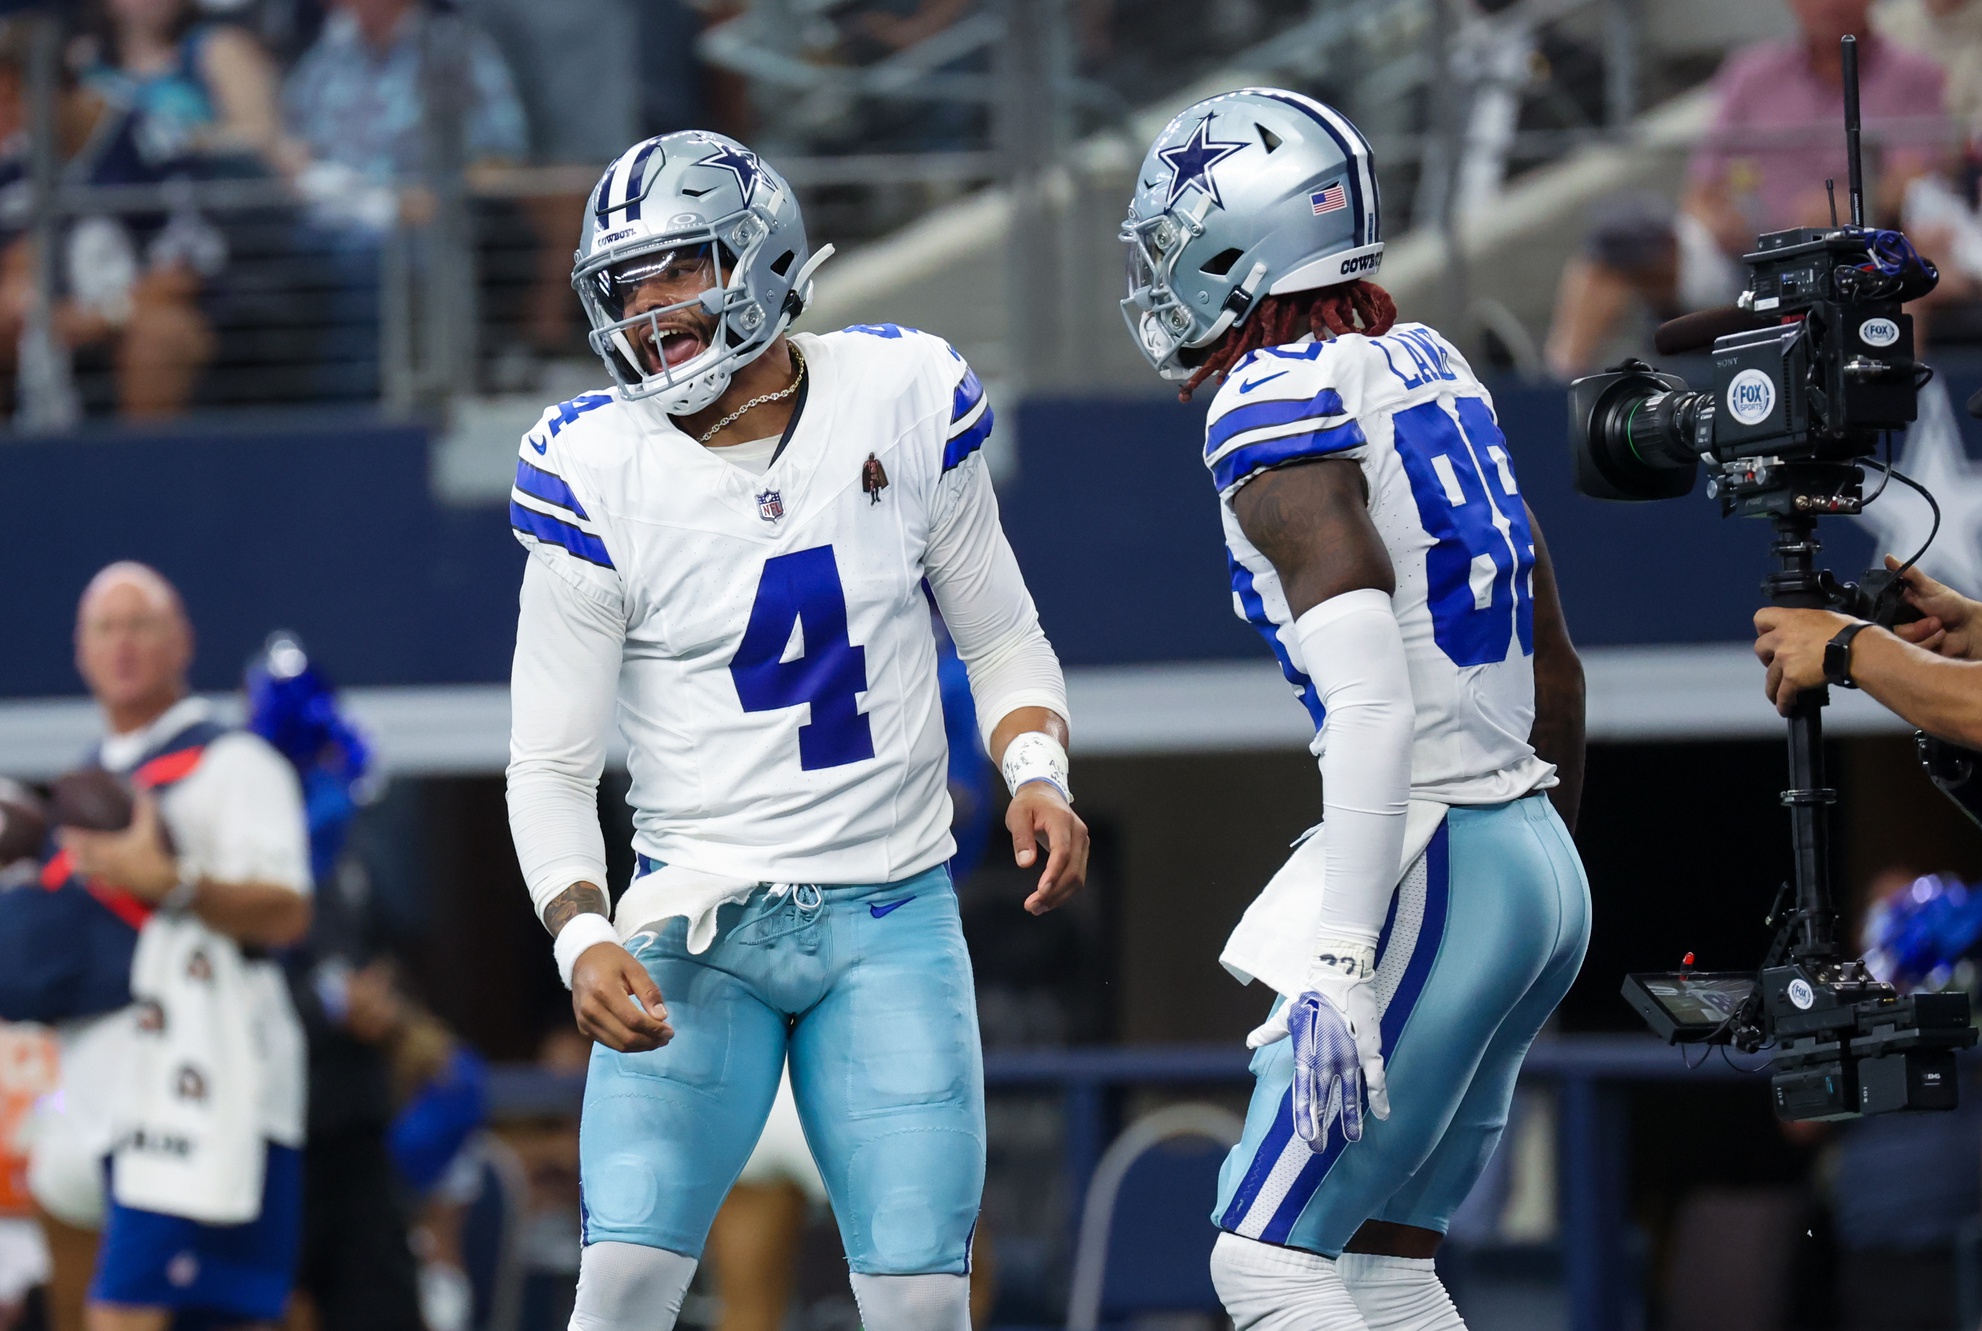 Oct 1, 2023; Arlington, Texas, USA; Dallas Cowboys quarterback Dak Prescott (4) celebrates with Dallas Cowboys wide receiver CeeDee Lamb (88) after throwing a touchdown pass during the first quarter against the New England Patriots at AT&T Stadium. Mandatory Credit: Kevin Jairaj-USA TODAY Sports